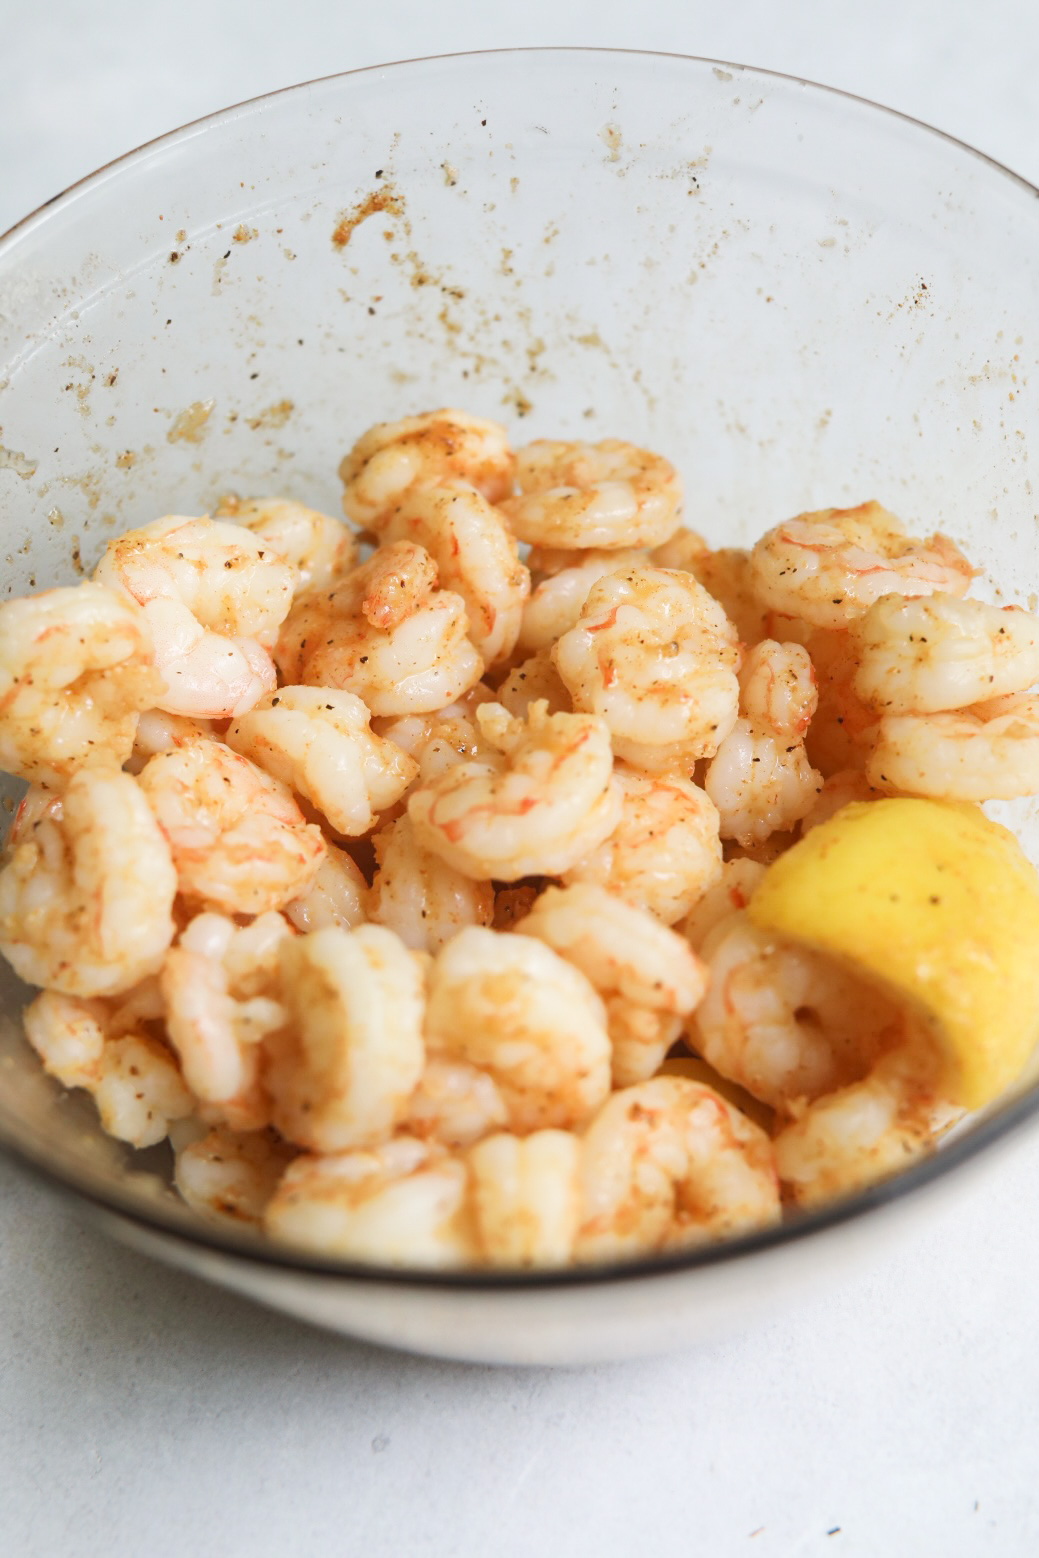 Poached shrimp in bowl, cooked with sliced lemons after boiling.